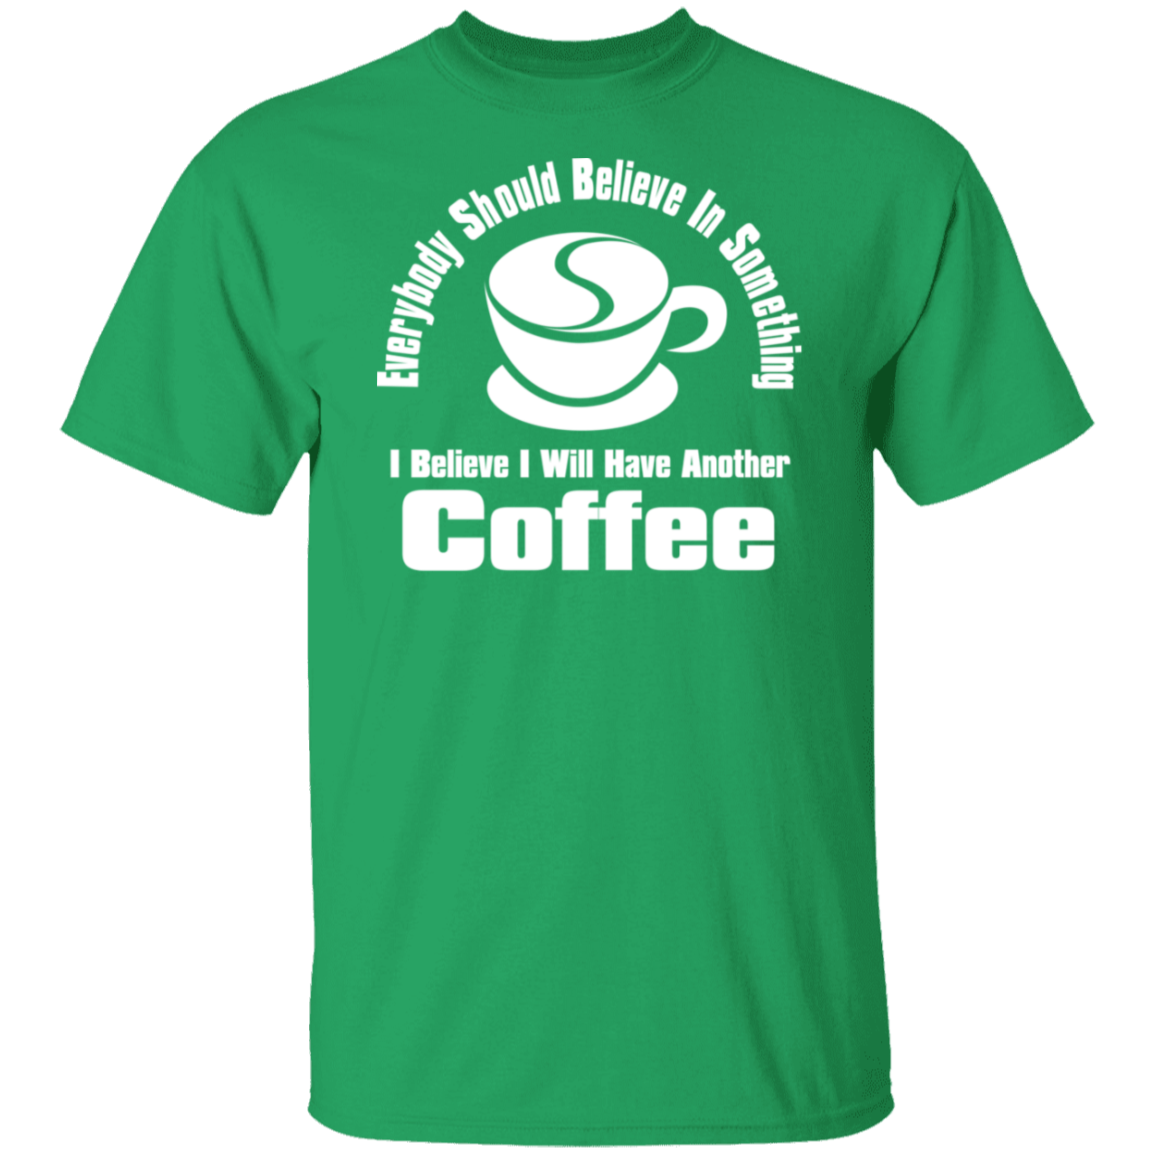 Everybody Should Believe Coffee White Print T-Shirt